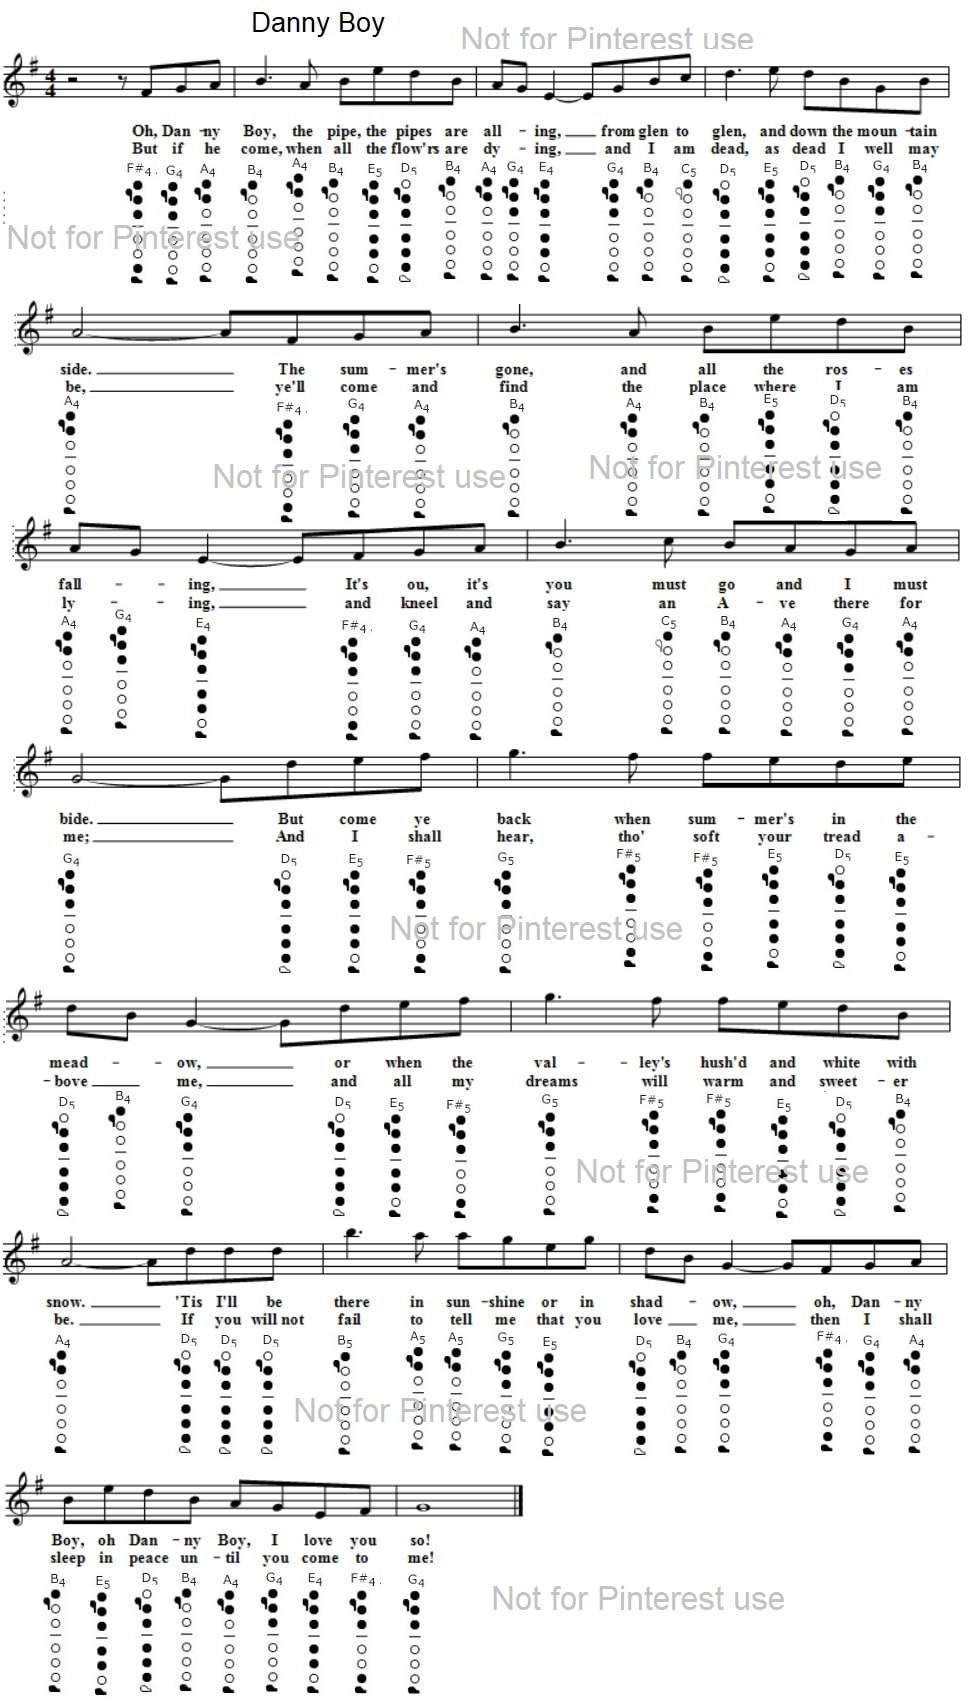 Danny Boy easy flute sheet music notes for beginners